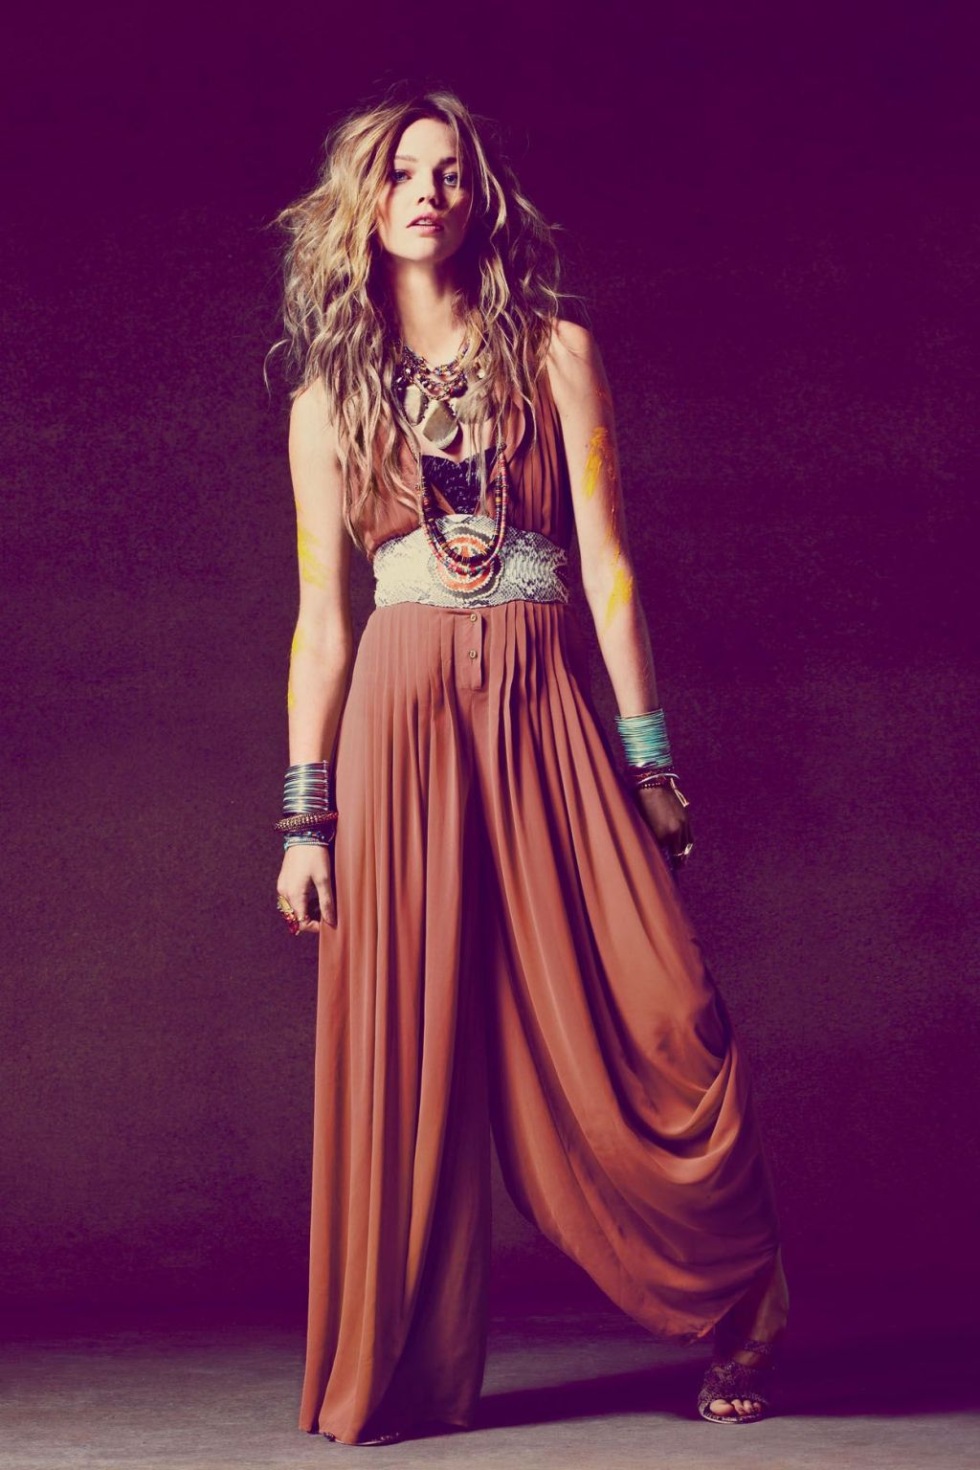 Express yourself through Bohemian Chic Style Fashion - Ohh My My